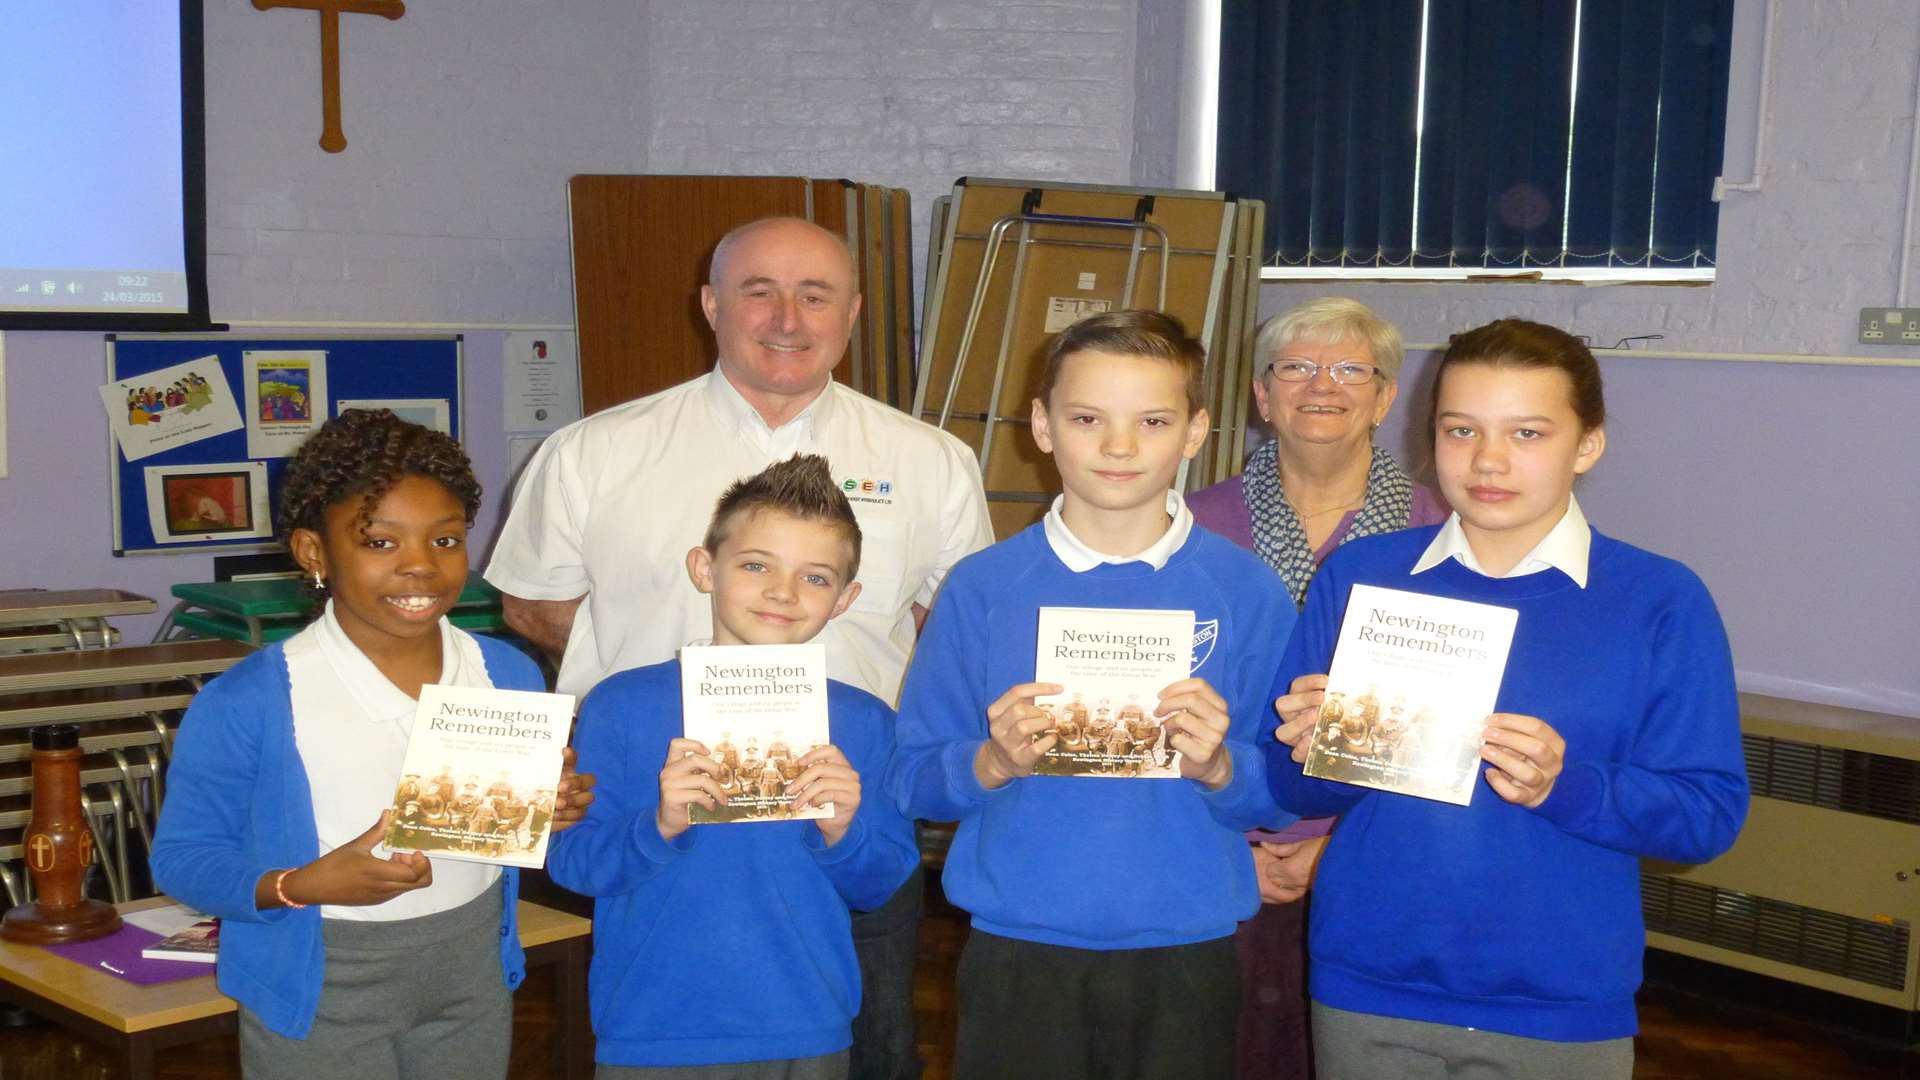 Grace, Owen, James and Rosina, members of Newington Primary school council, receive the books from authors, Dean Coles and Thelma Dudley